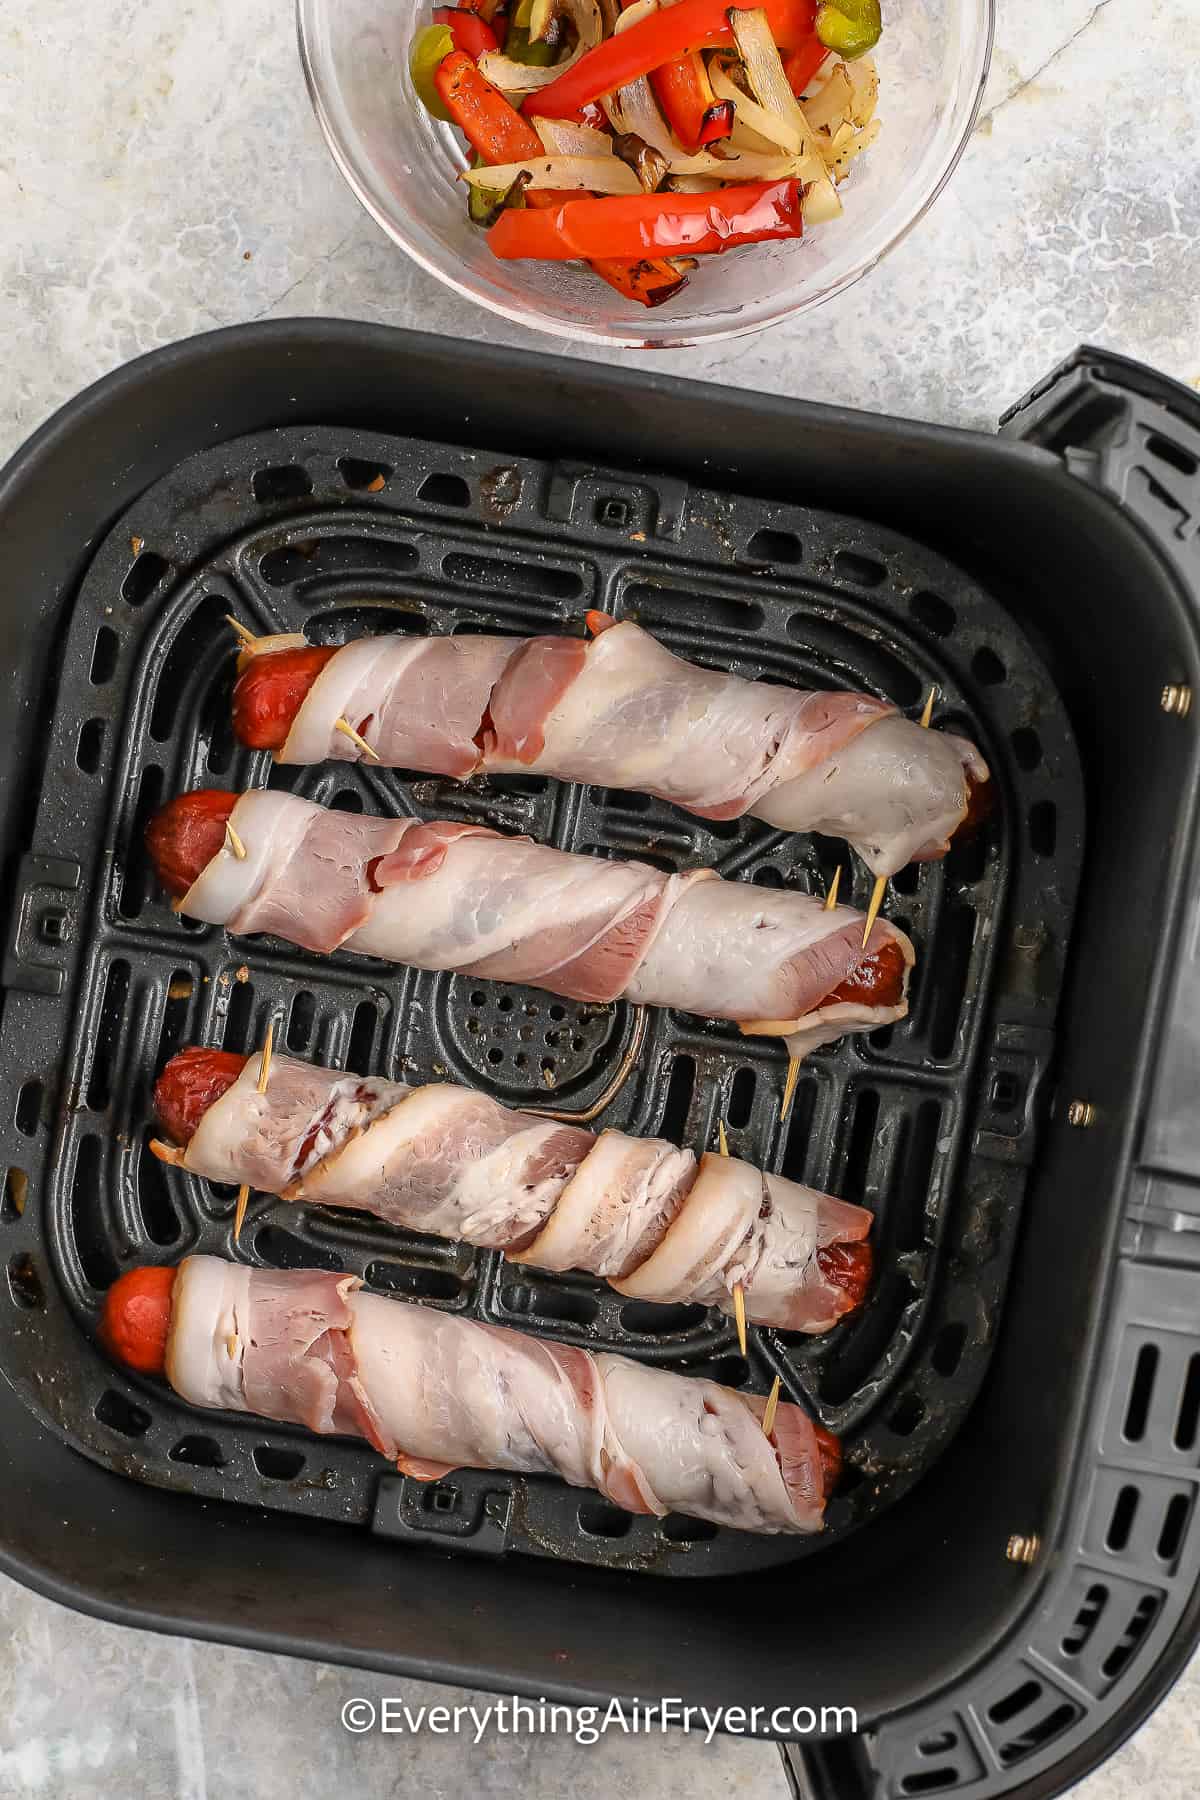 Hot dogs wrapped in bacon in an air fryer basket